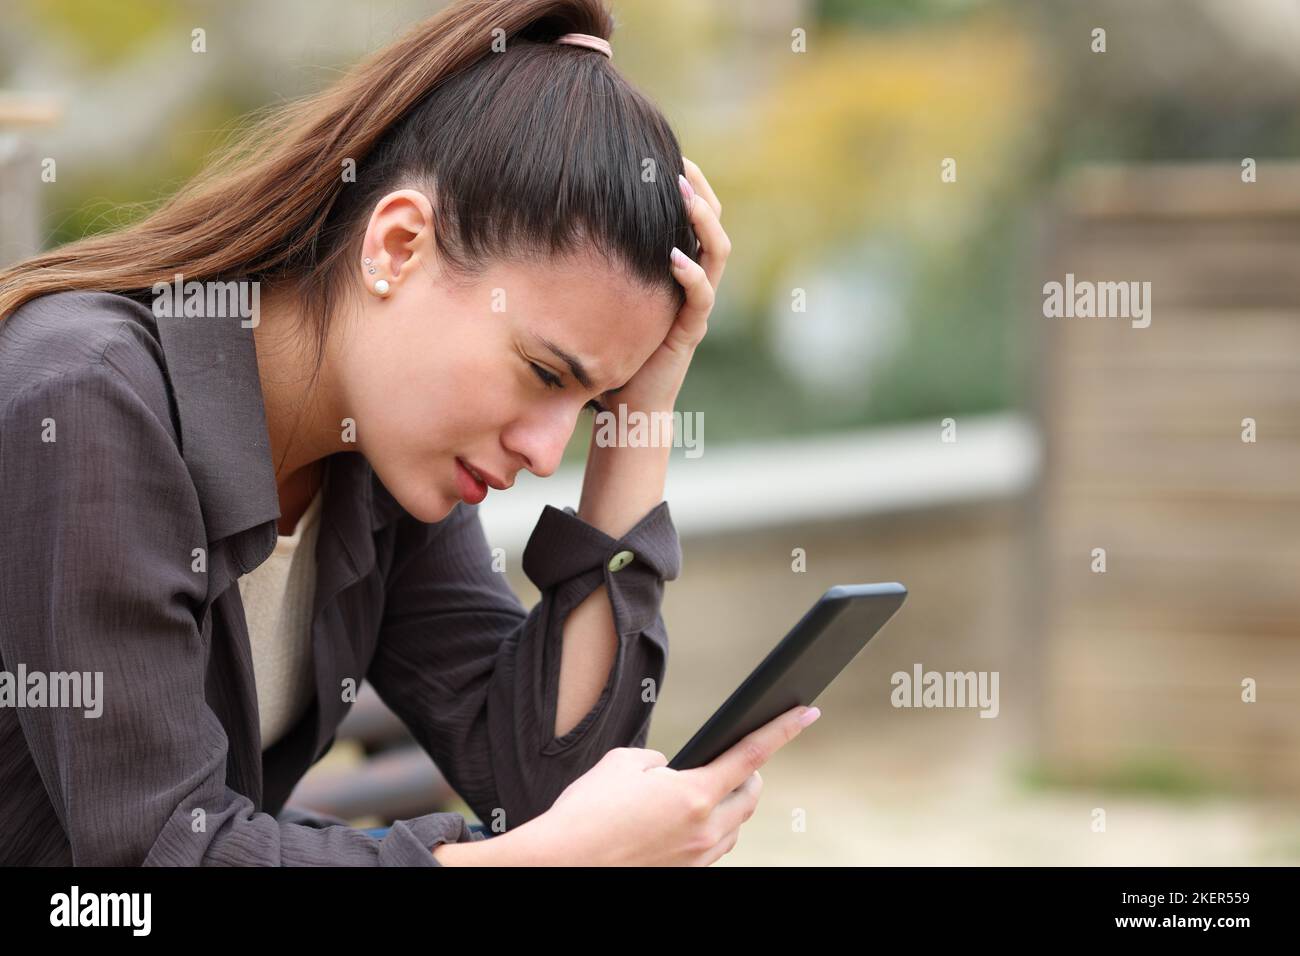 Worried teen complaining checking bad news on mobile phone in a park Stock Photo